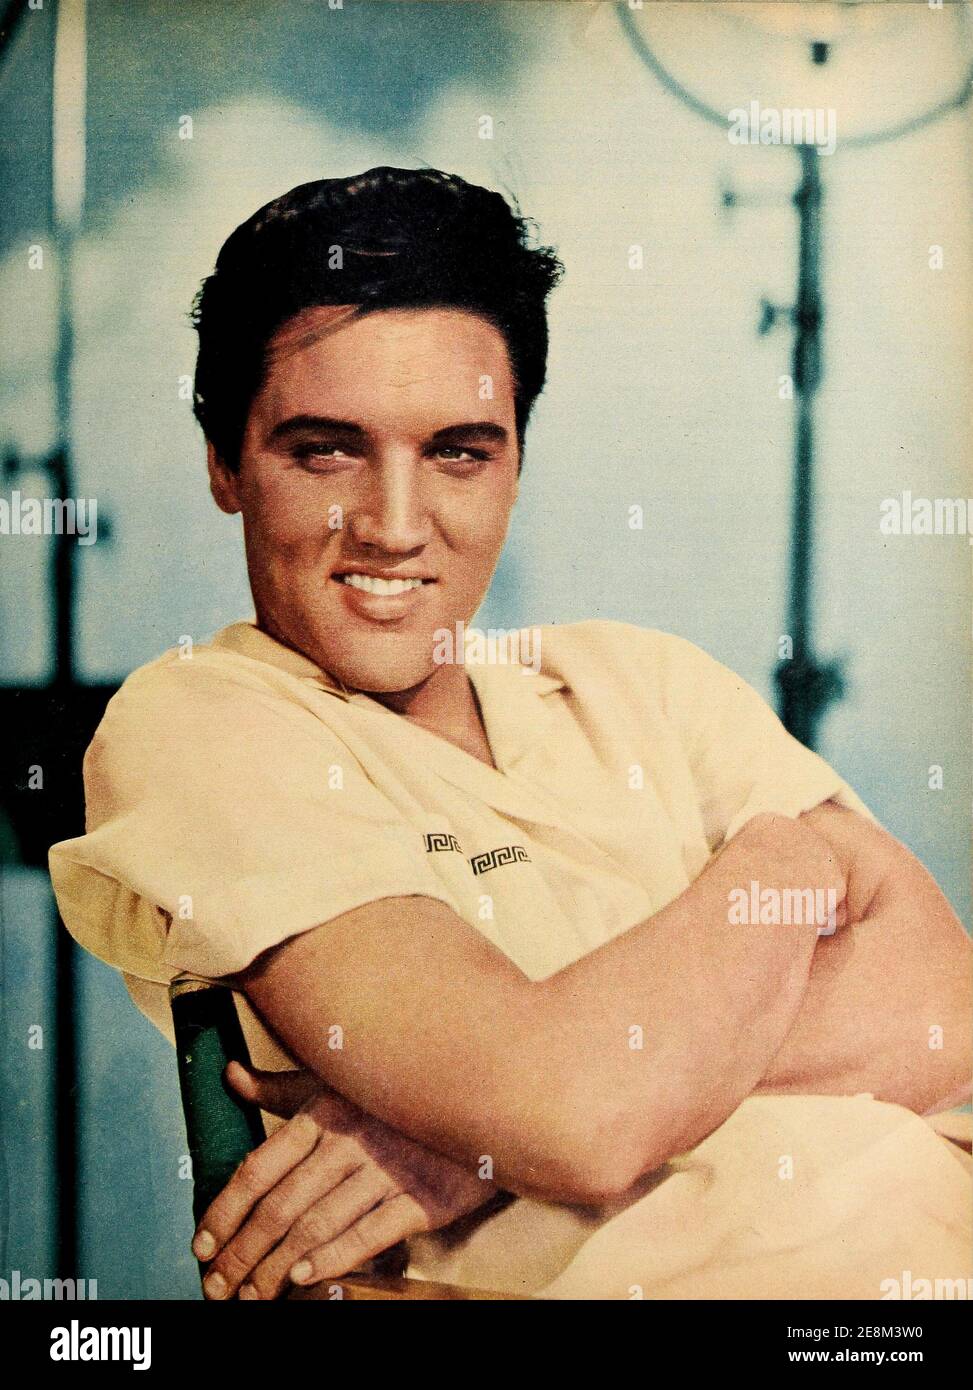 Elvis Presley, photo for Modern Screen, 1 June 1958. Printed at the time he was leaving to join the army. Stock Photo